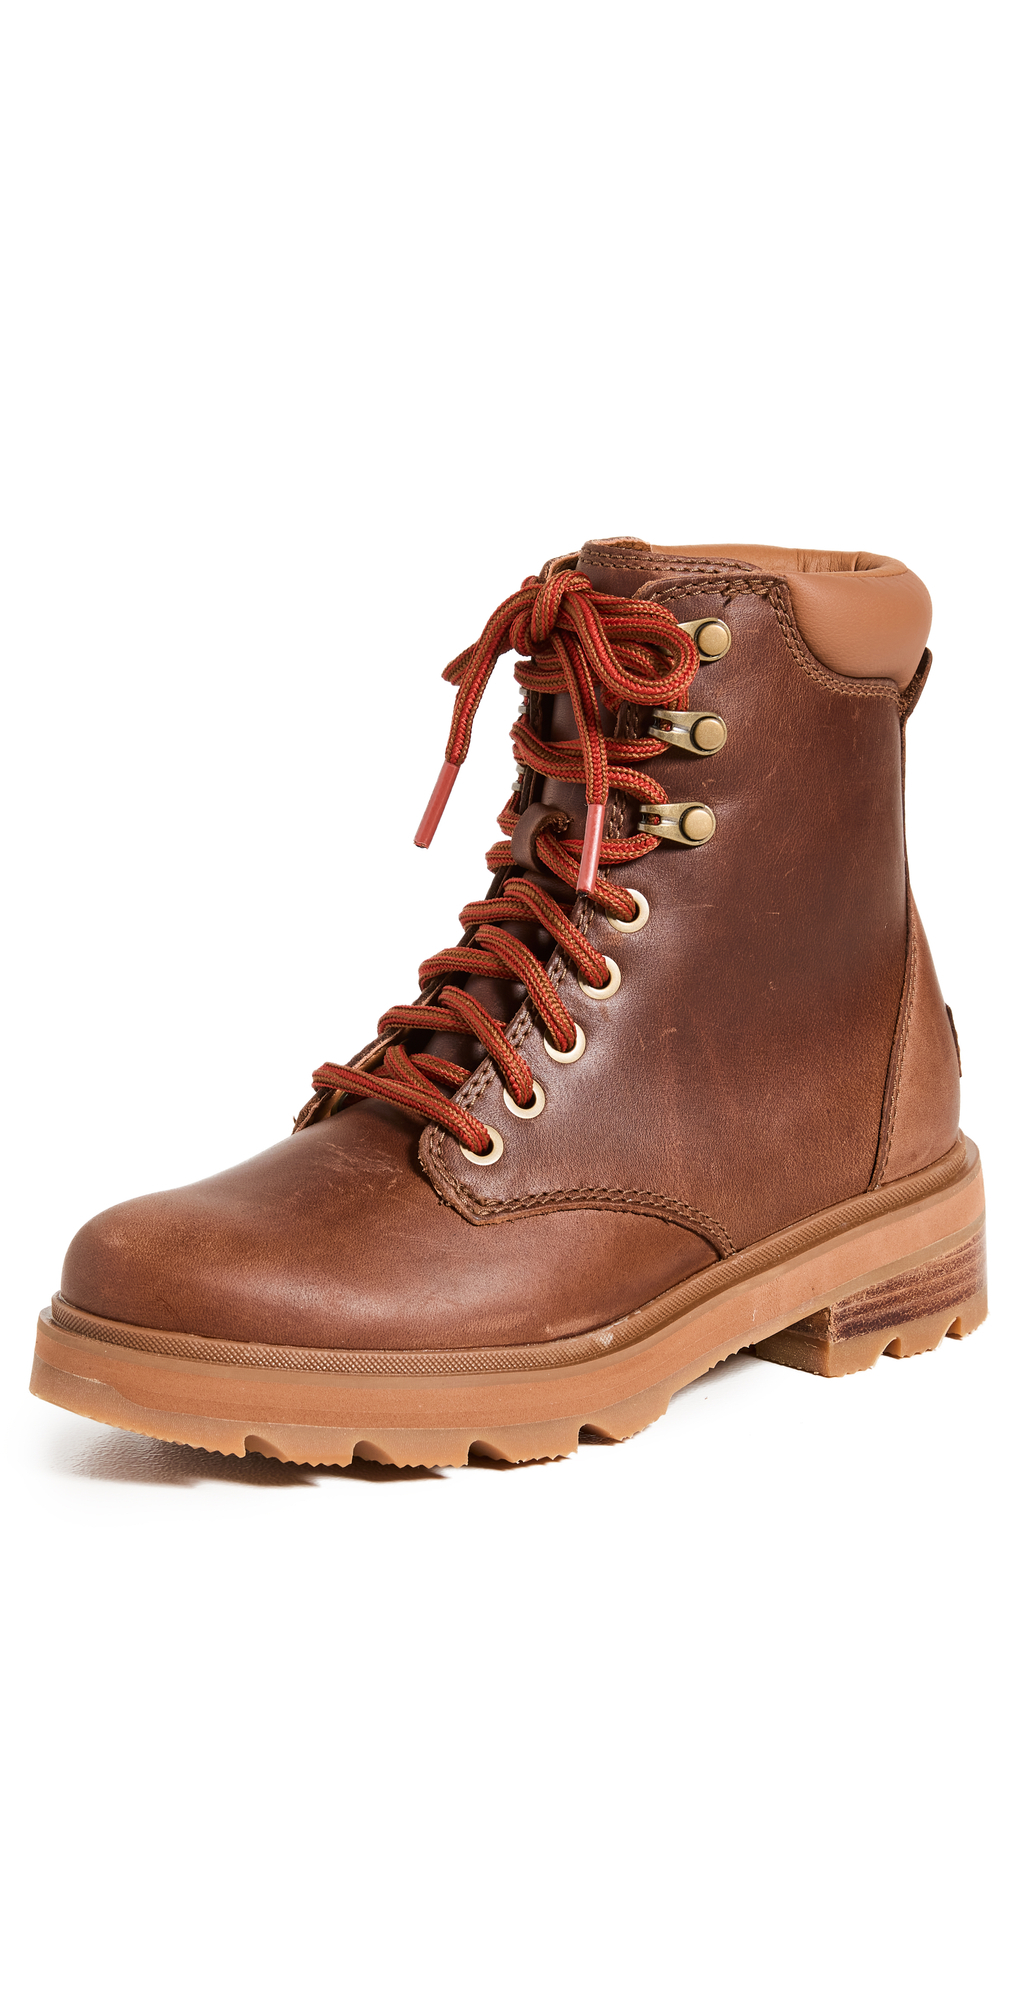 Sorel Lennox Lace Up Boots in tan